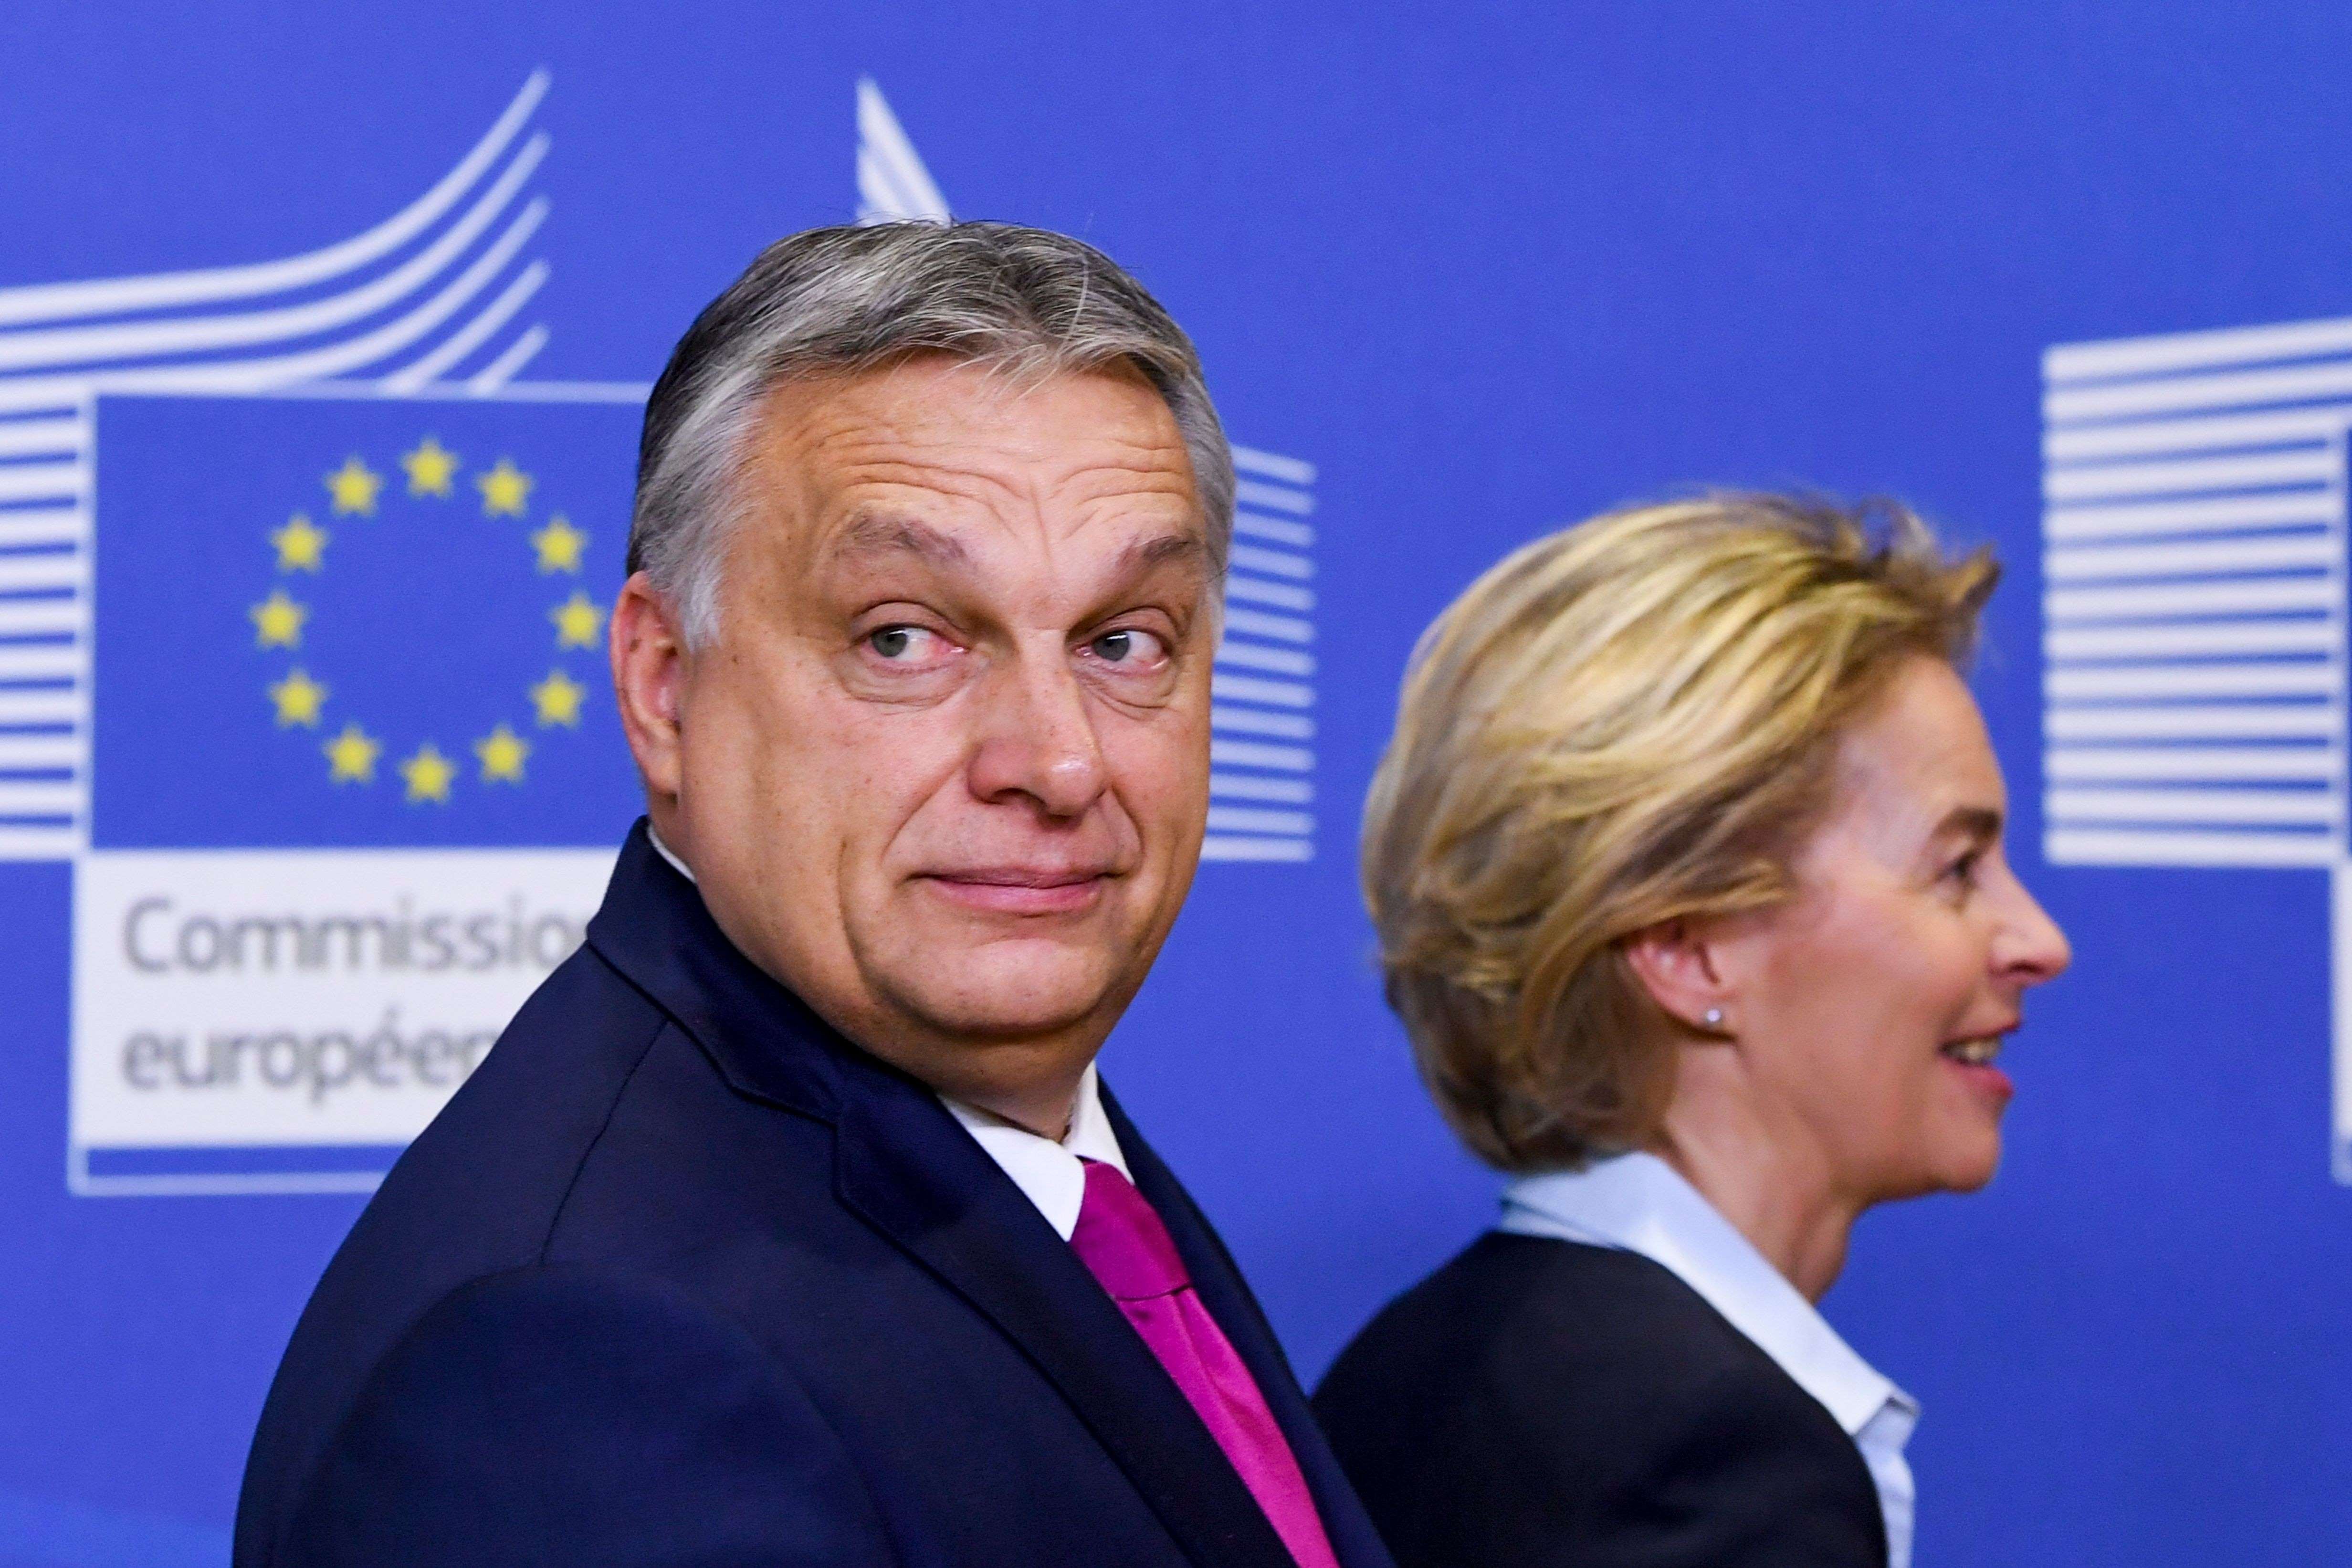 Prime Minister of Hungary Viktor Orban with the President of the European Commission Ursula von der Leyen in Brussels, Belgium, February 3, 2020. 